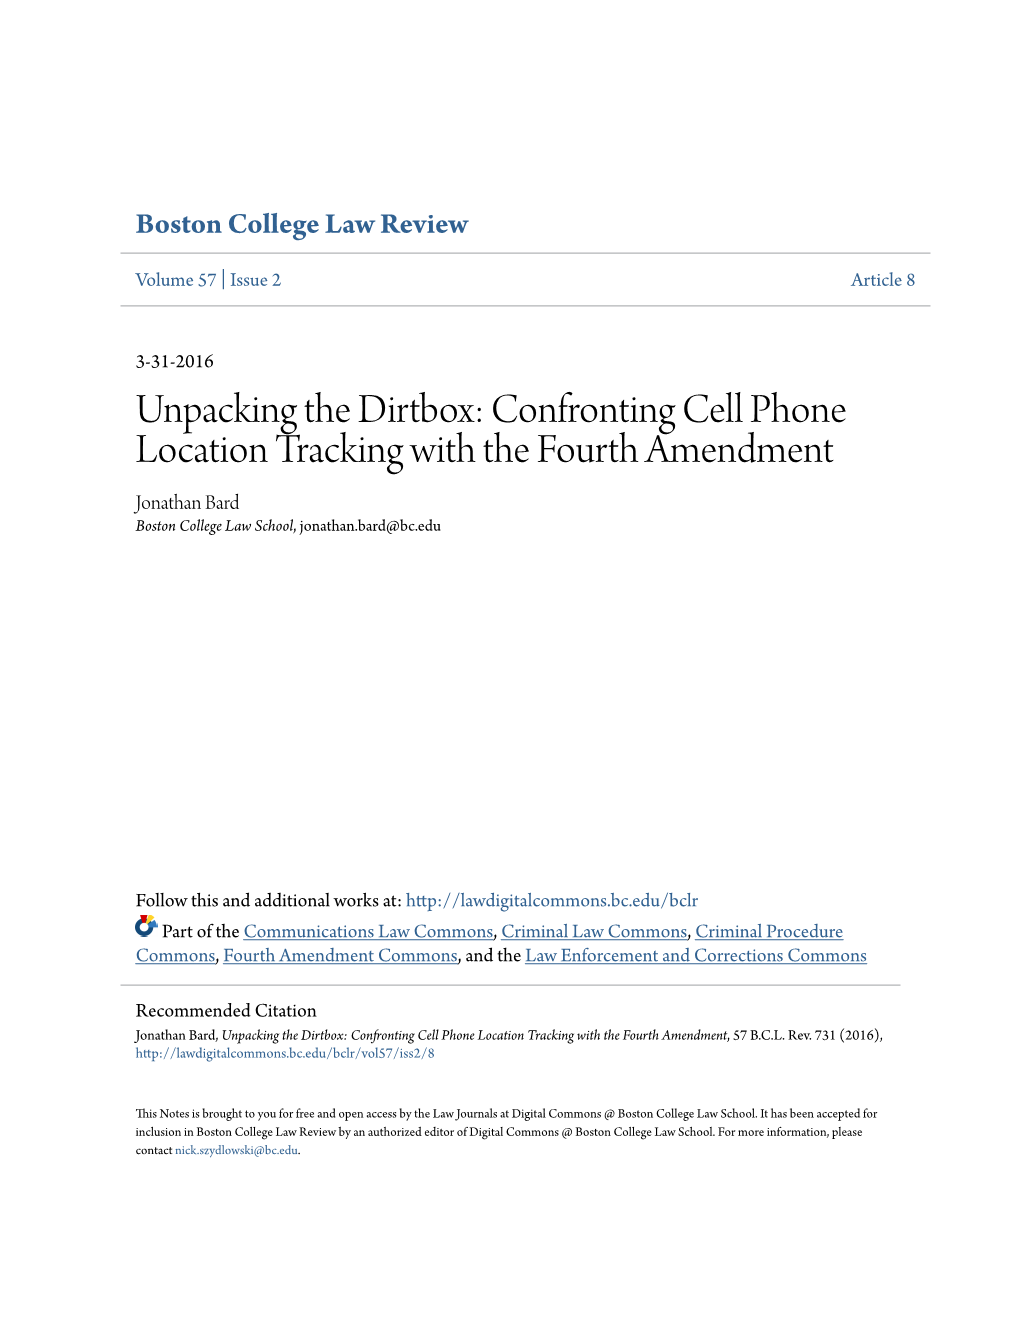 Unpacking the Dirtbox: Confronting Cell Phone Location Tracking with the Fourth Amendment Jonathan Bard Boston College Law School, Jonathan.Bard@Bc.Edu